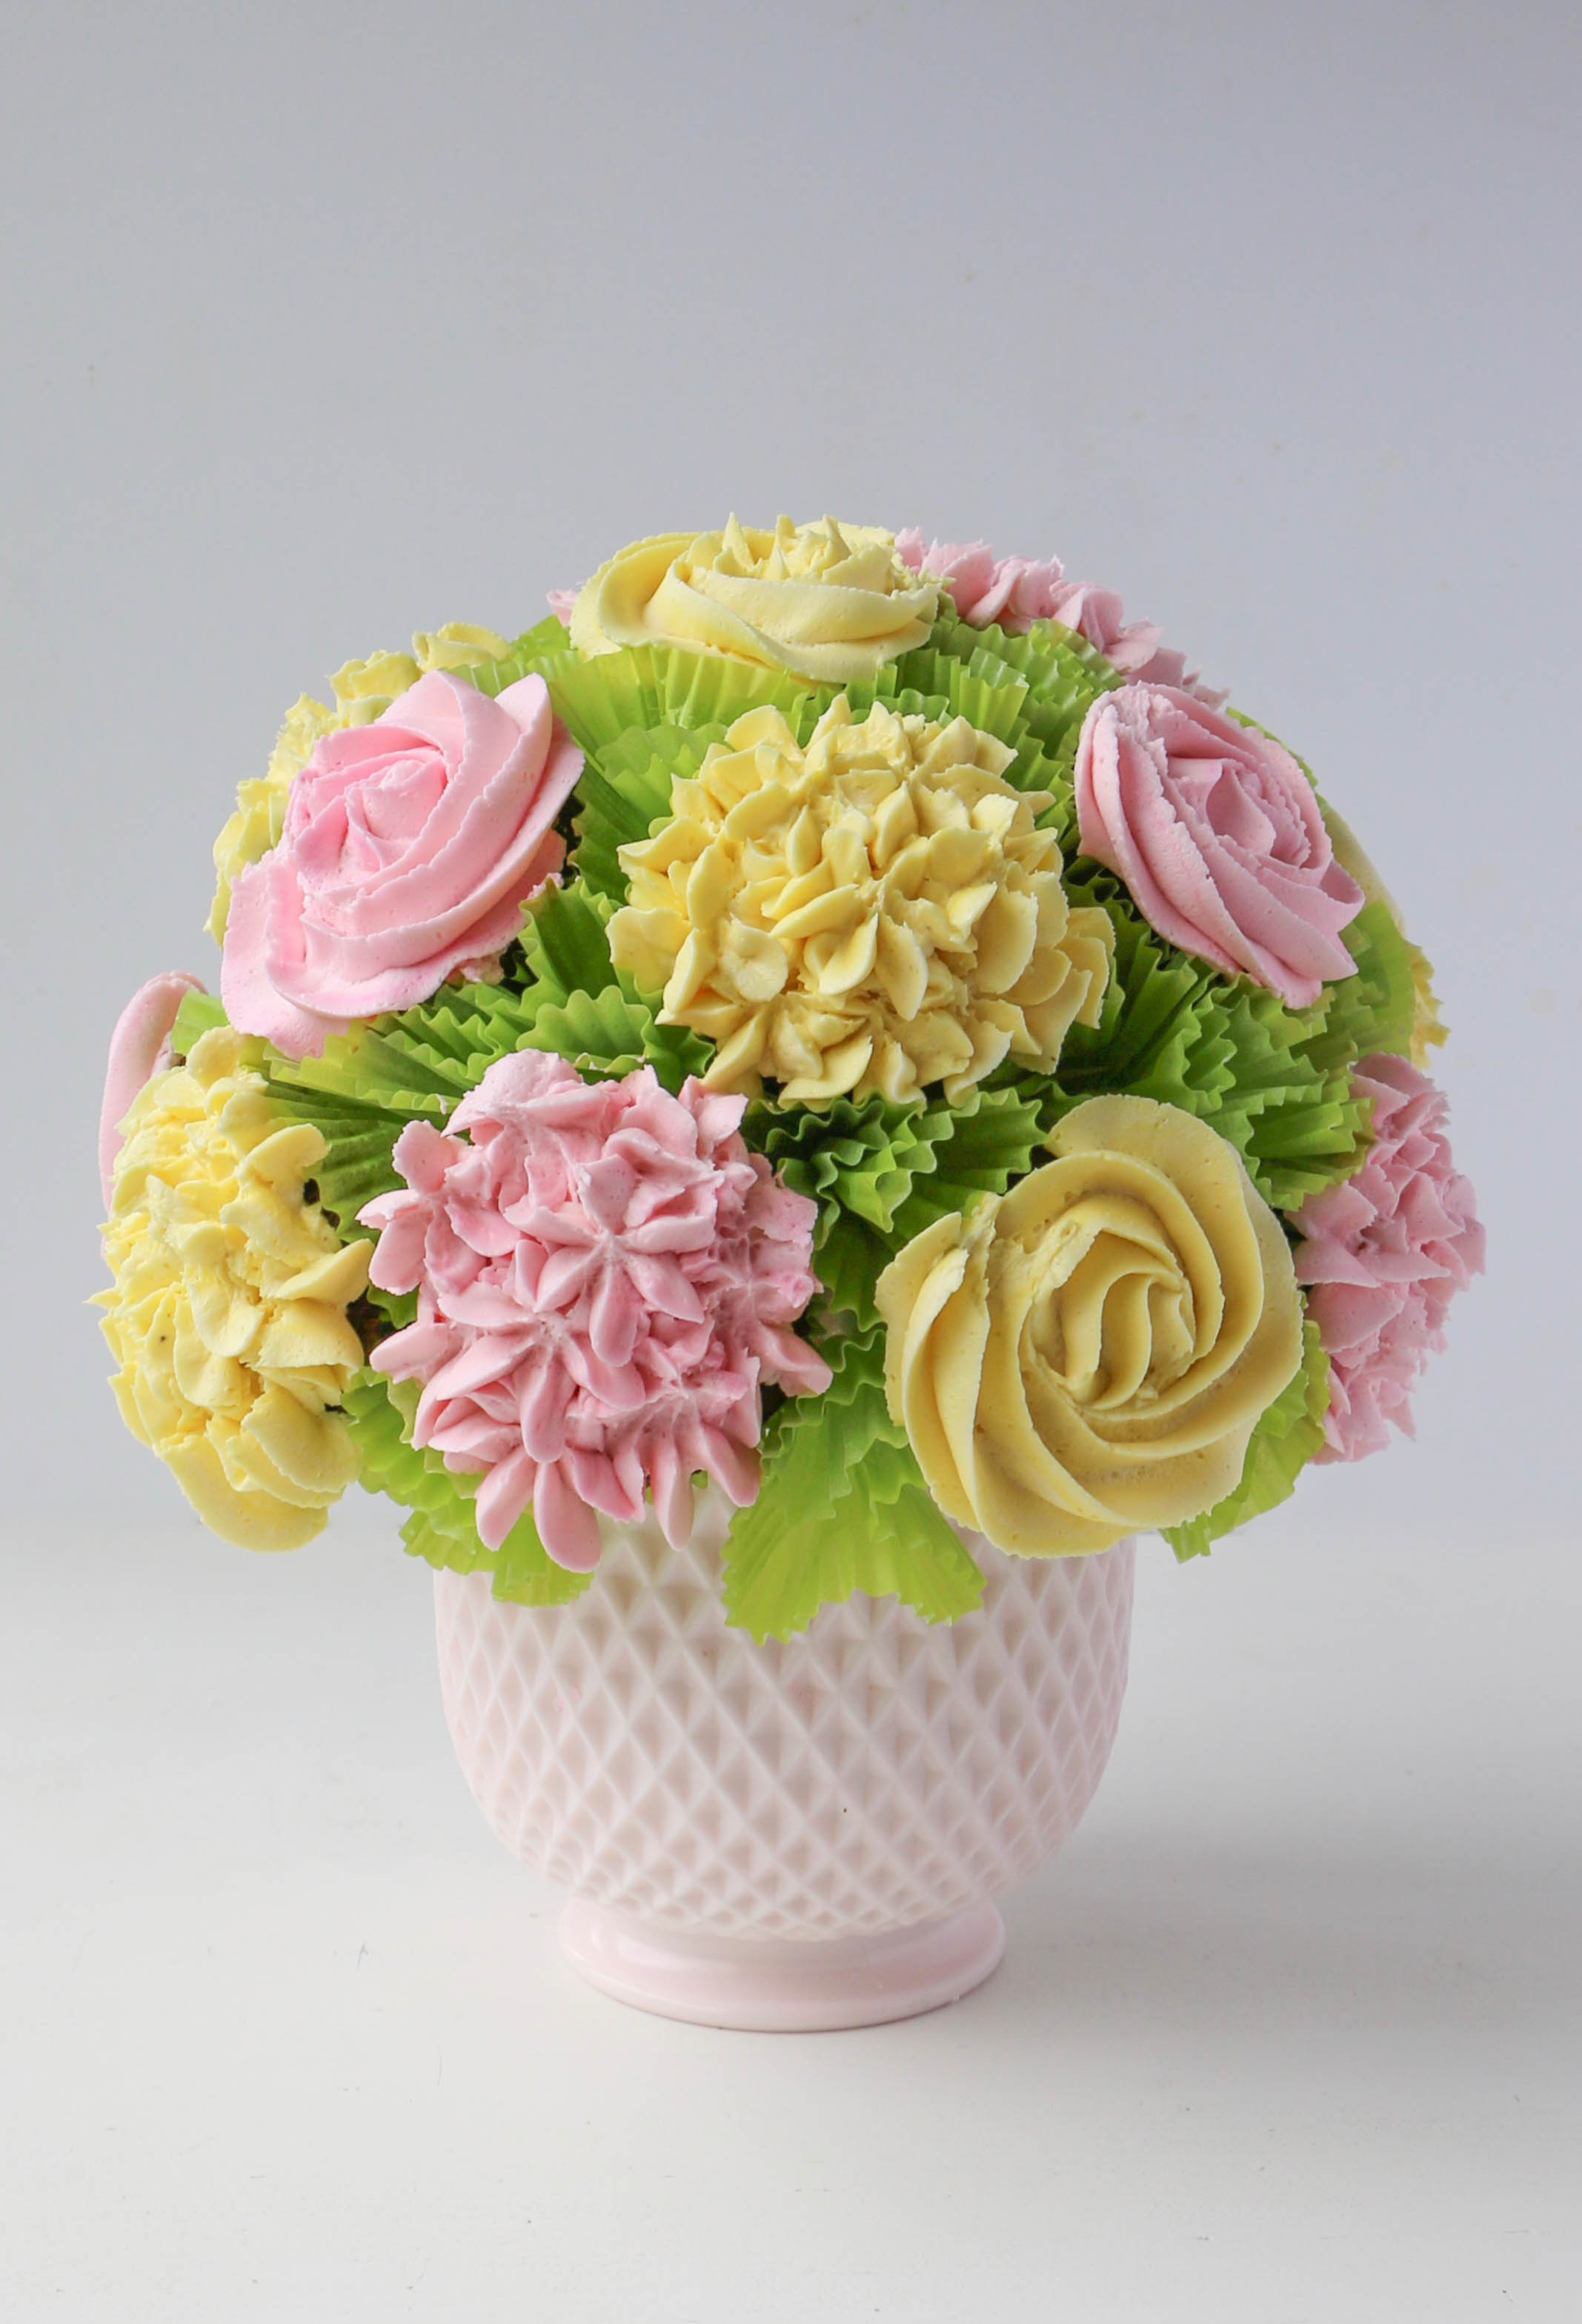 Cupcake Bouquet in 5 Steps: An Easy Tutorial